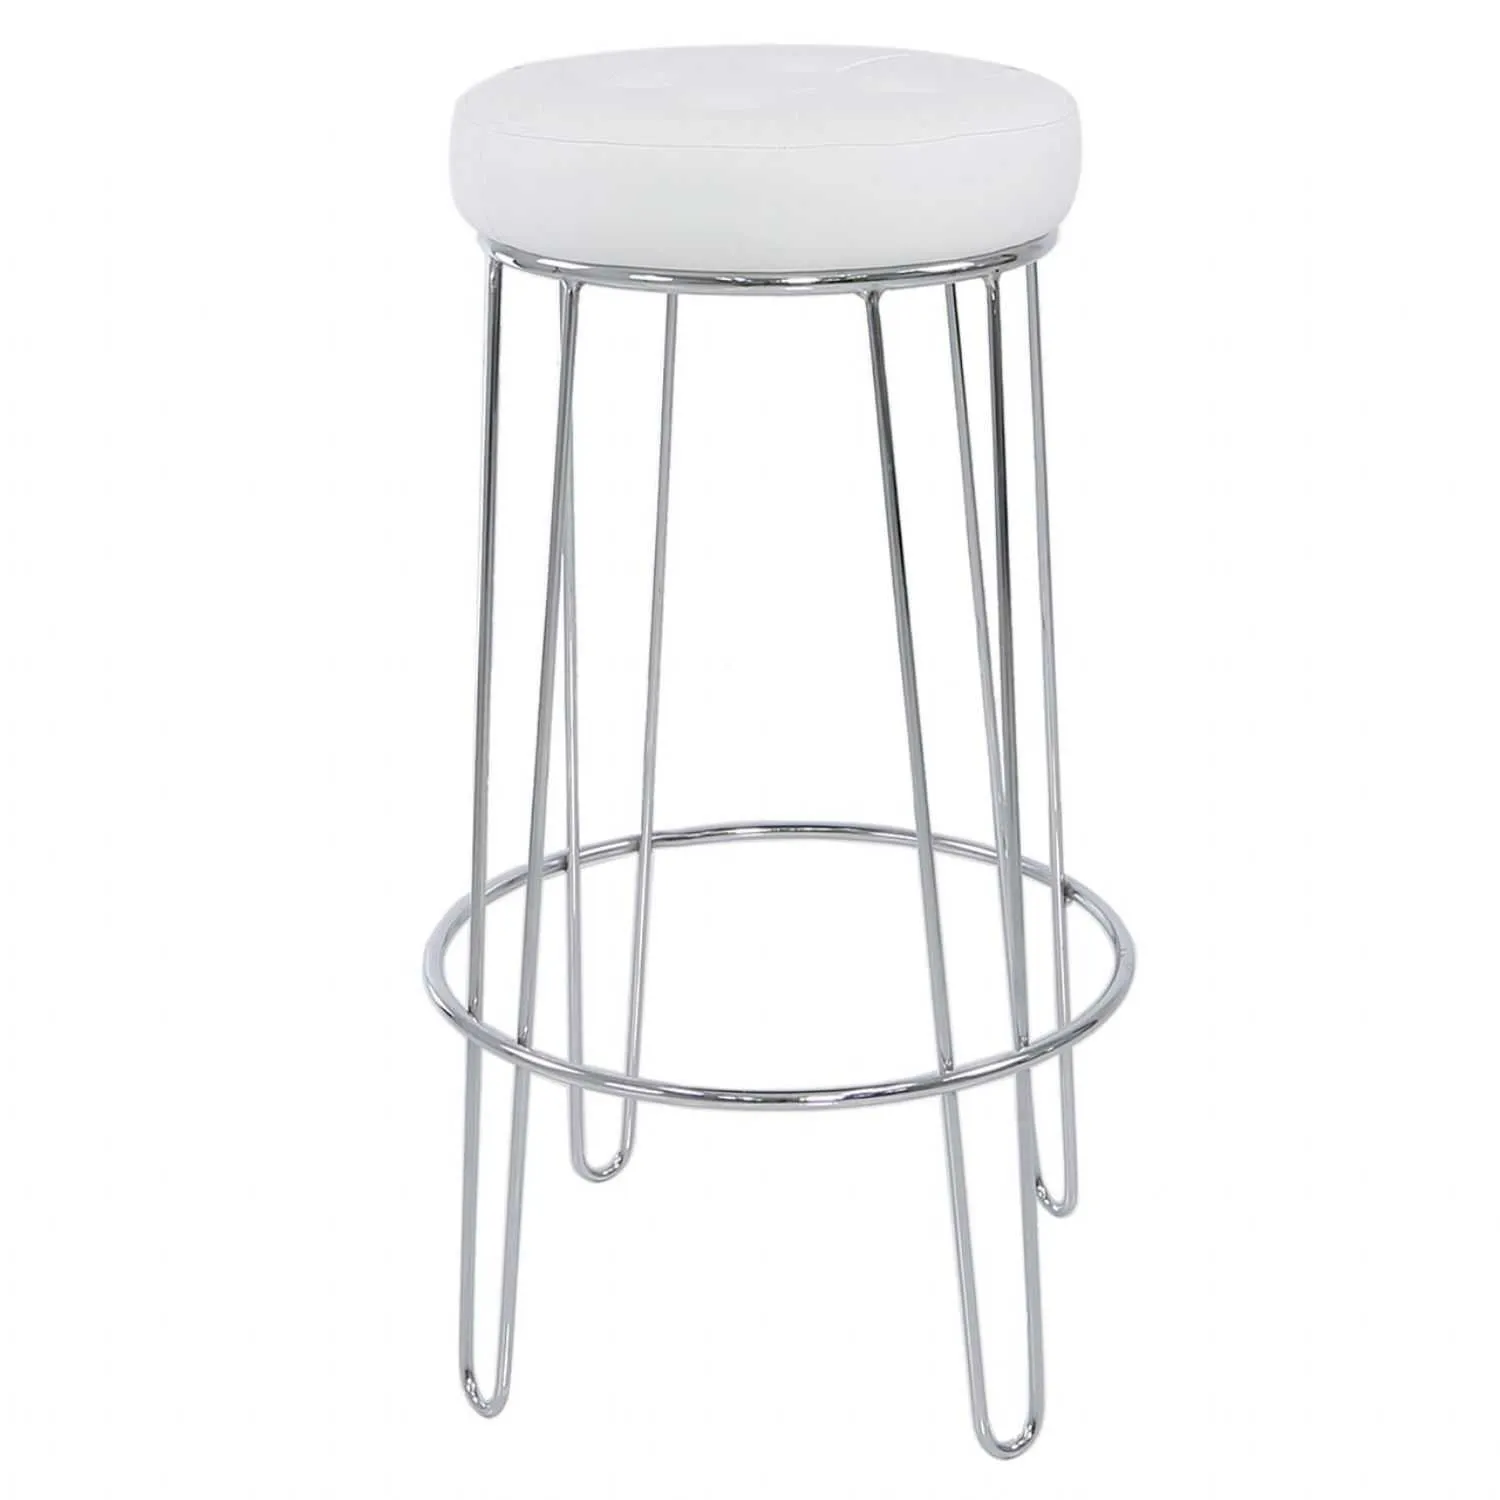 Atlas Chrome and White Faux Leather Bar Stool